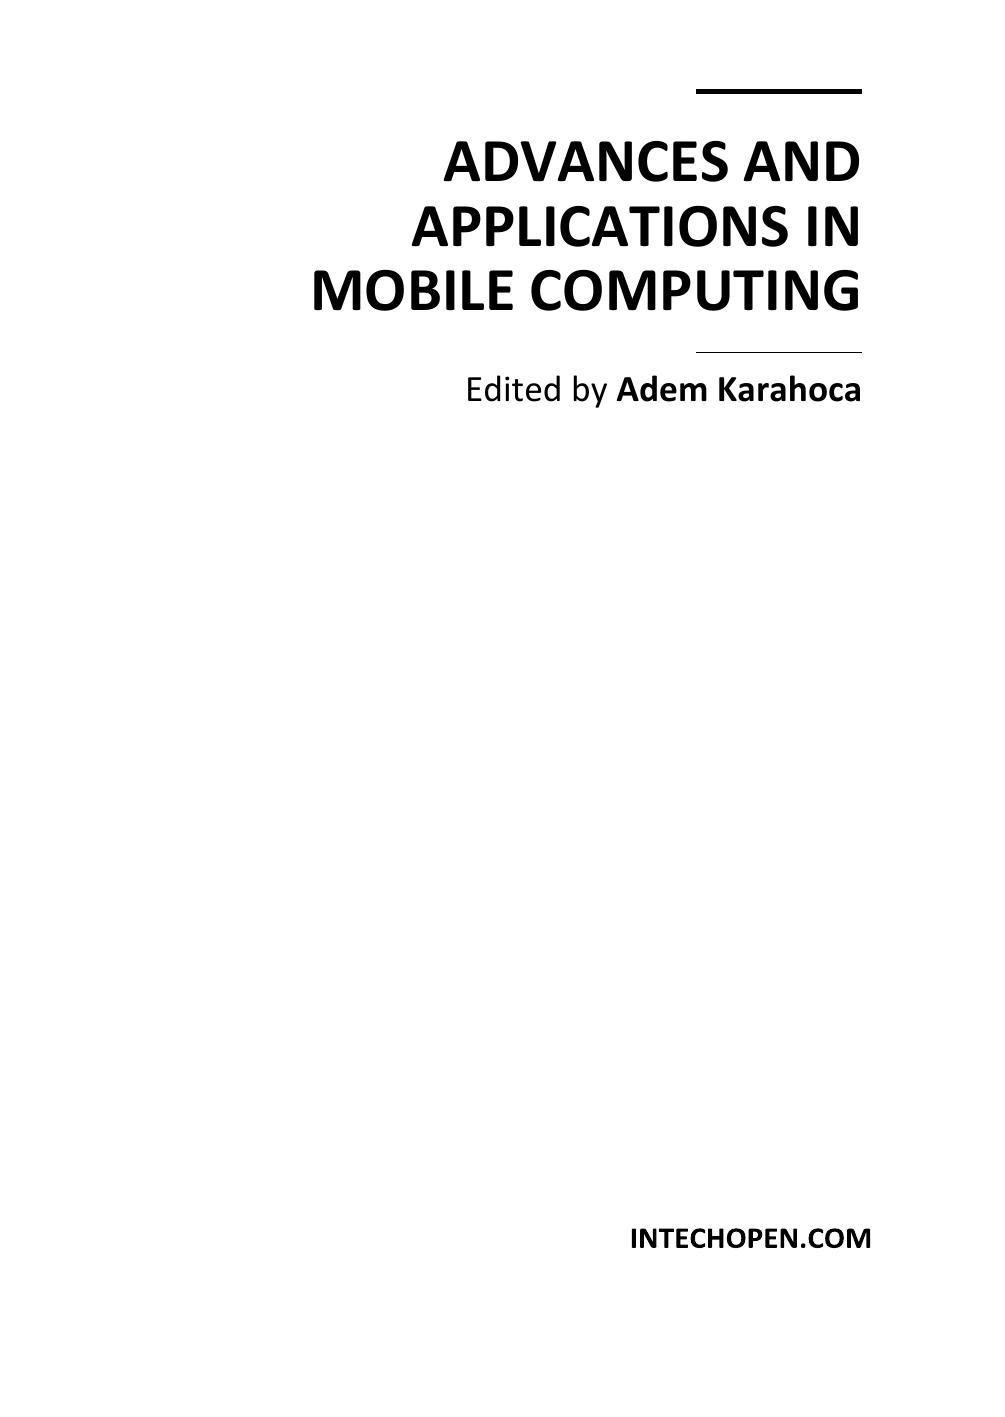 Advances and Applications in Mobile Computing 2012.pdf